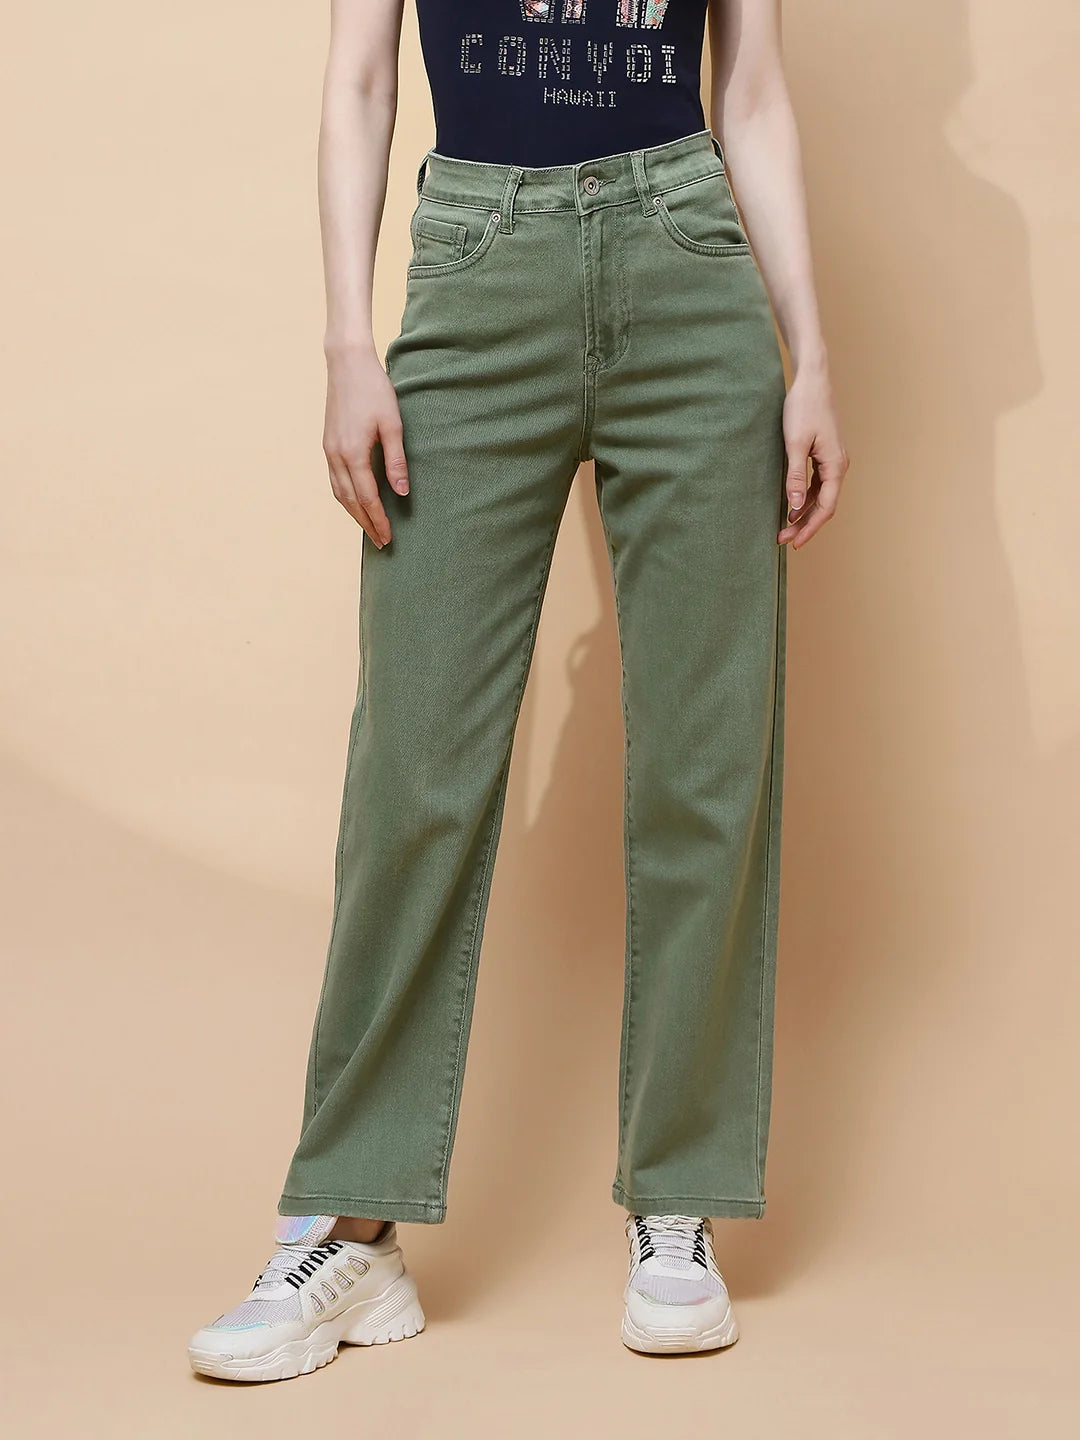 Olive Cotton Straight Slim Fit Jeans For Women